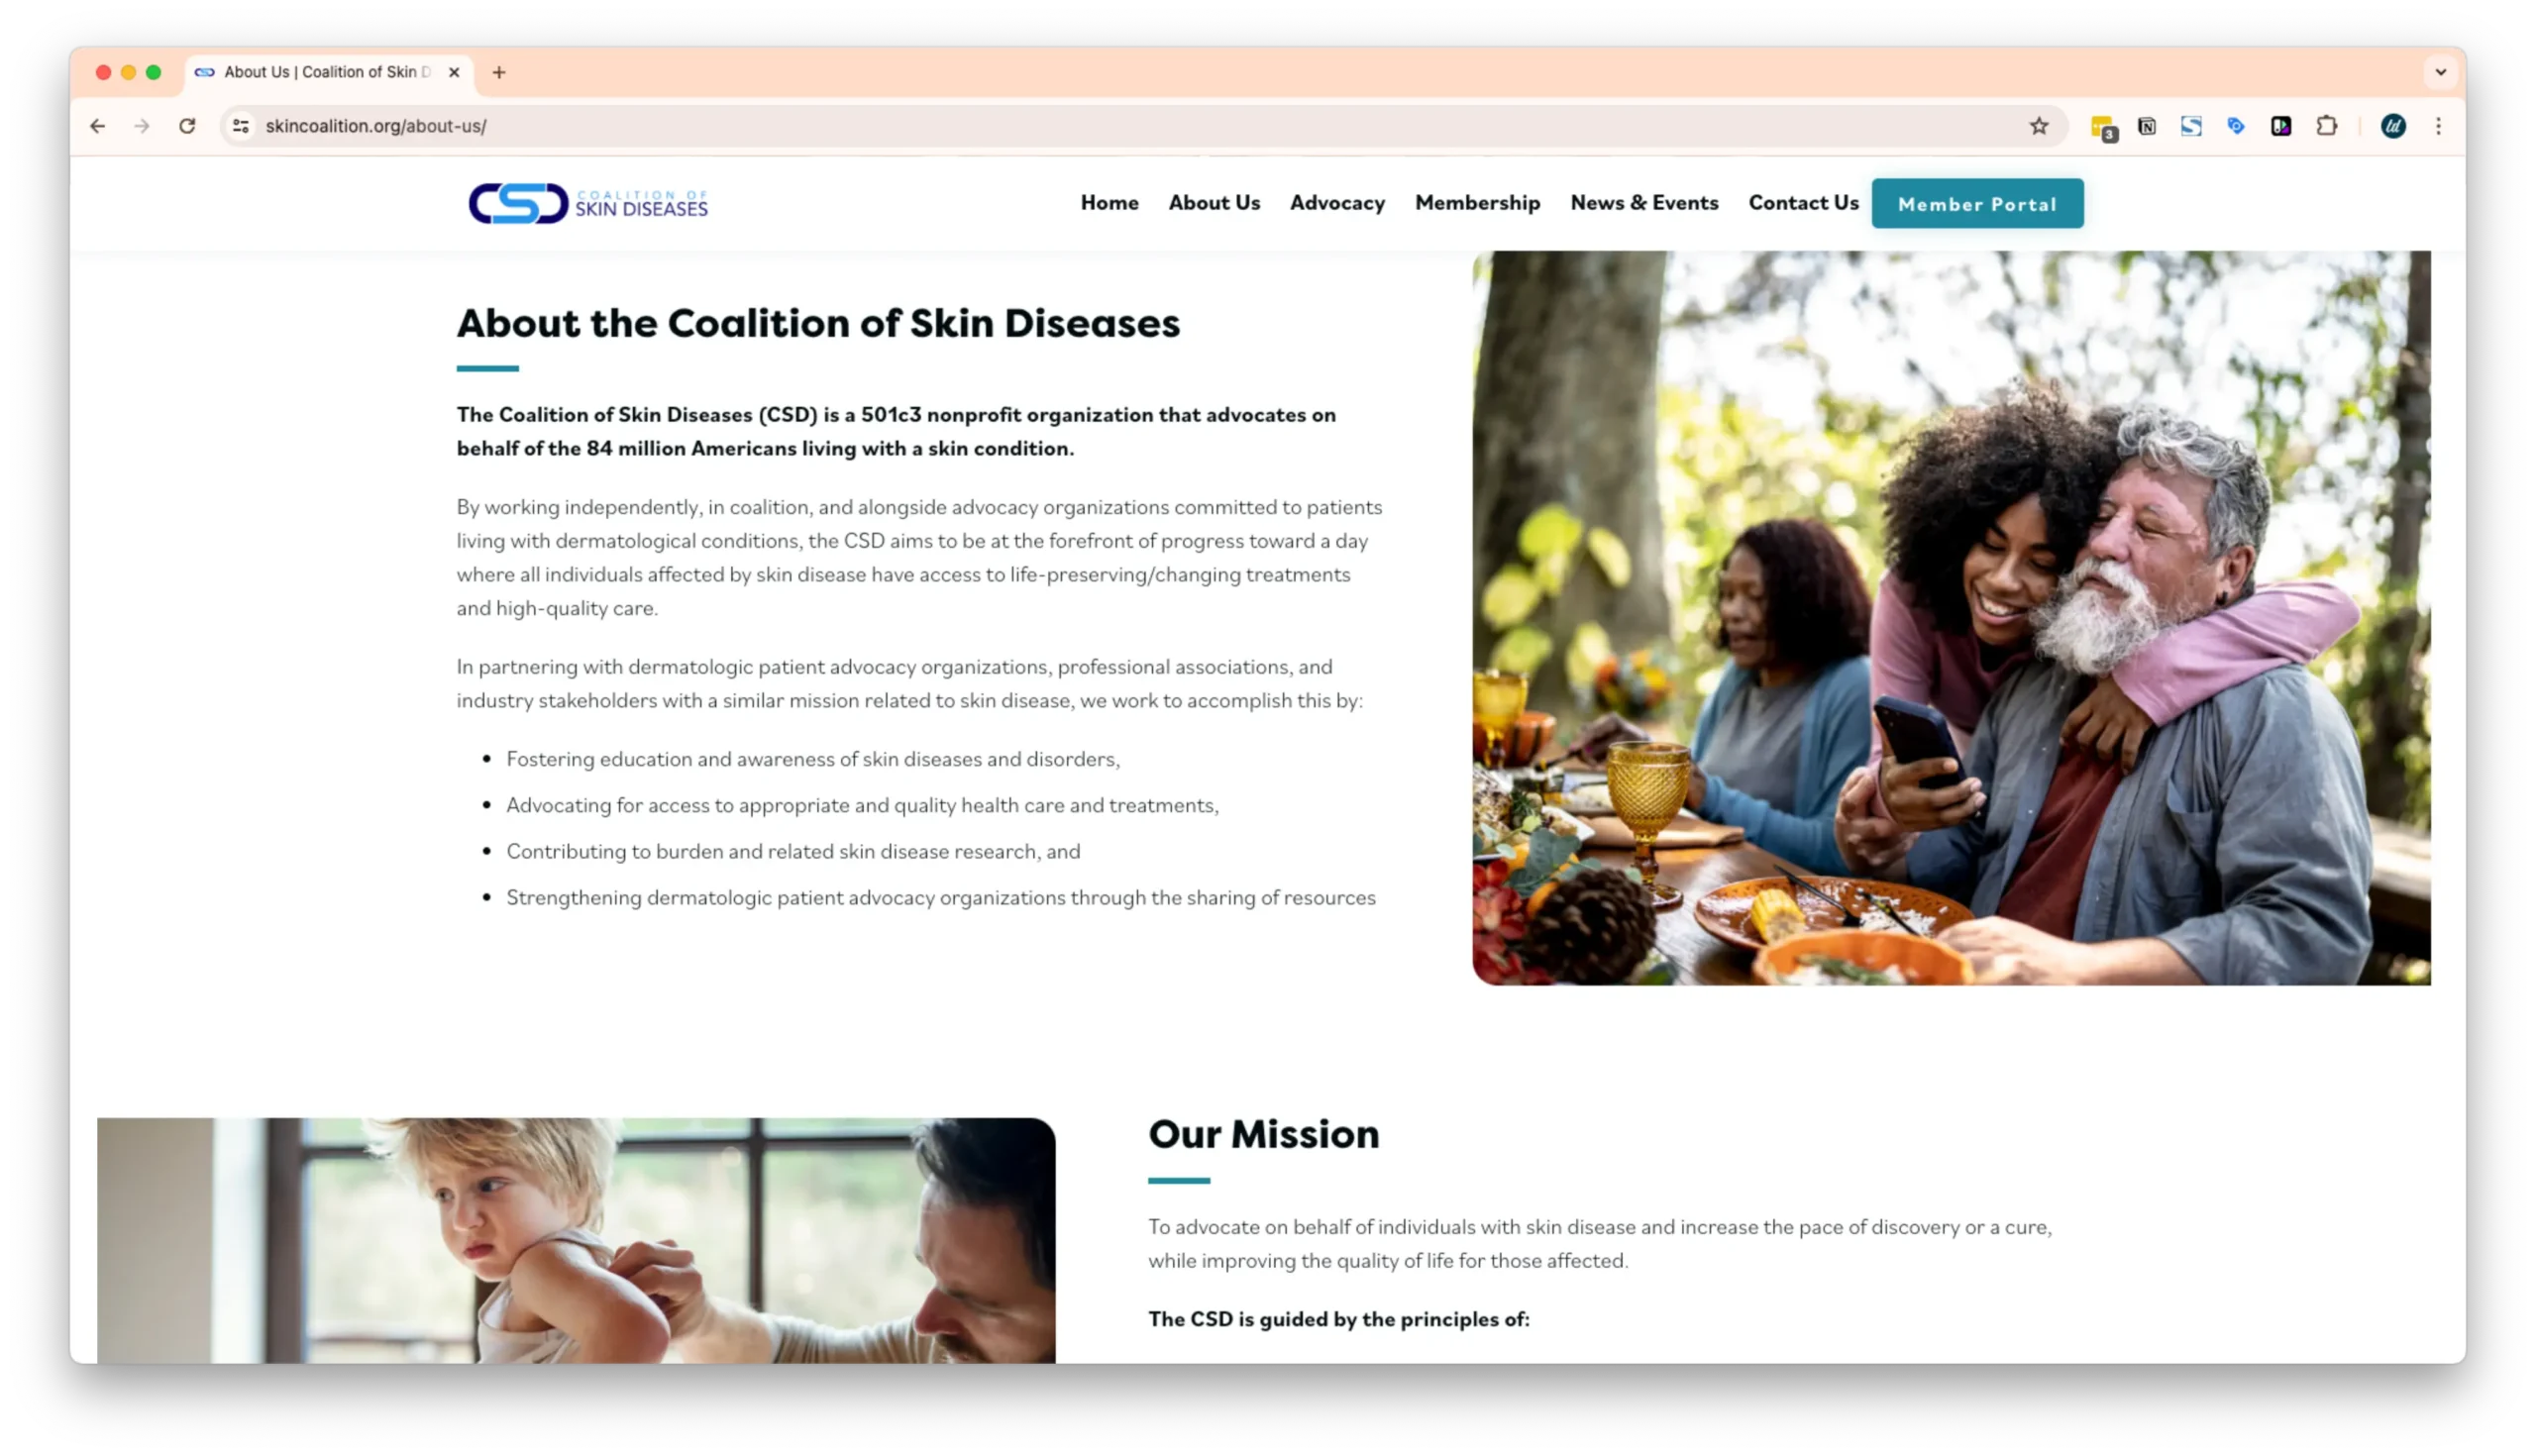 A webpage for the Coalition of Skin Diseases, a nonprofit organization advocating for individuals with skin conditions. An image shows a woman embracing an older man while looking at a phone, with another person in the background.